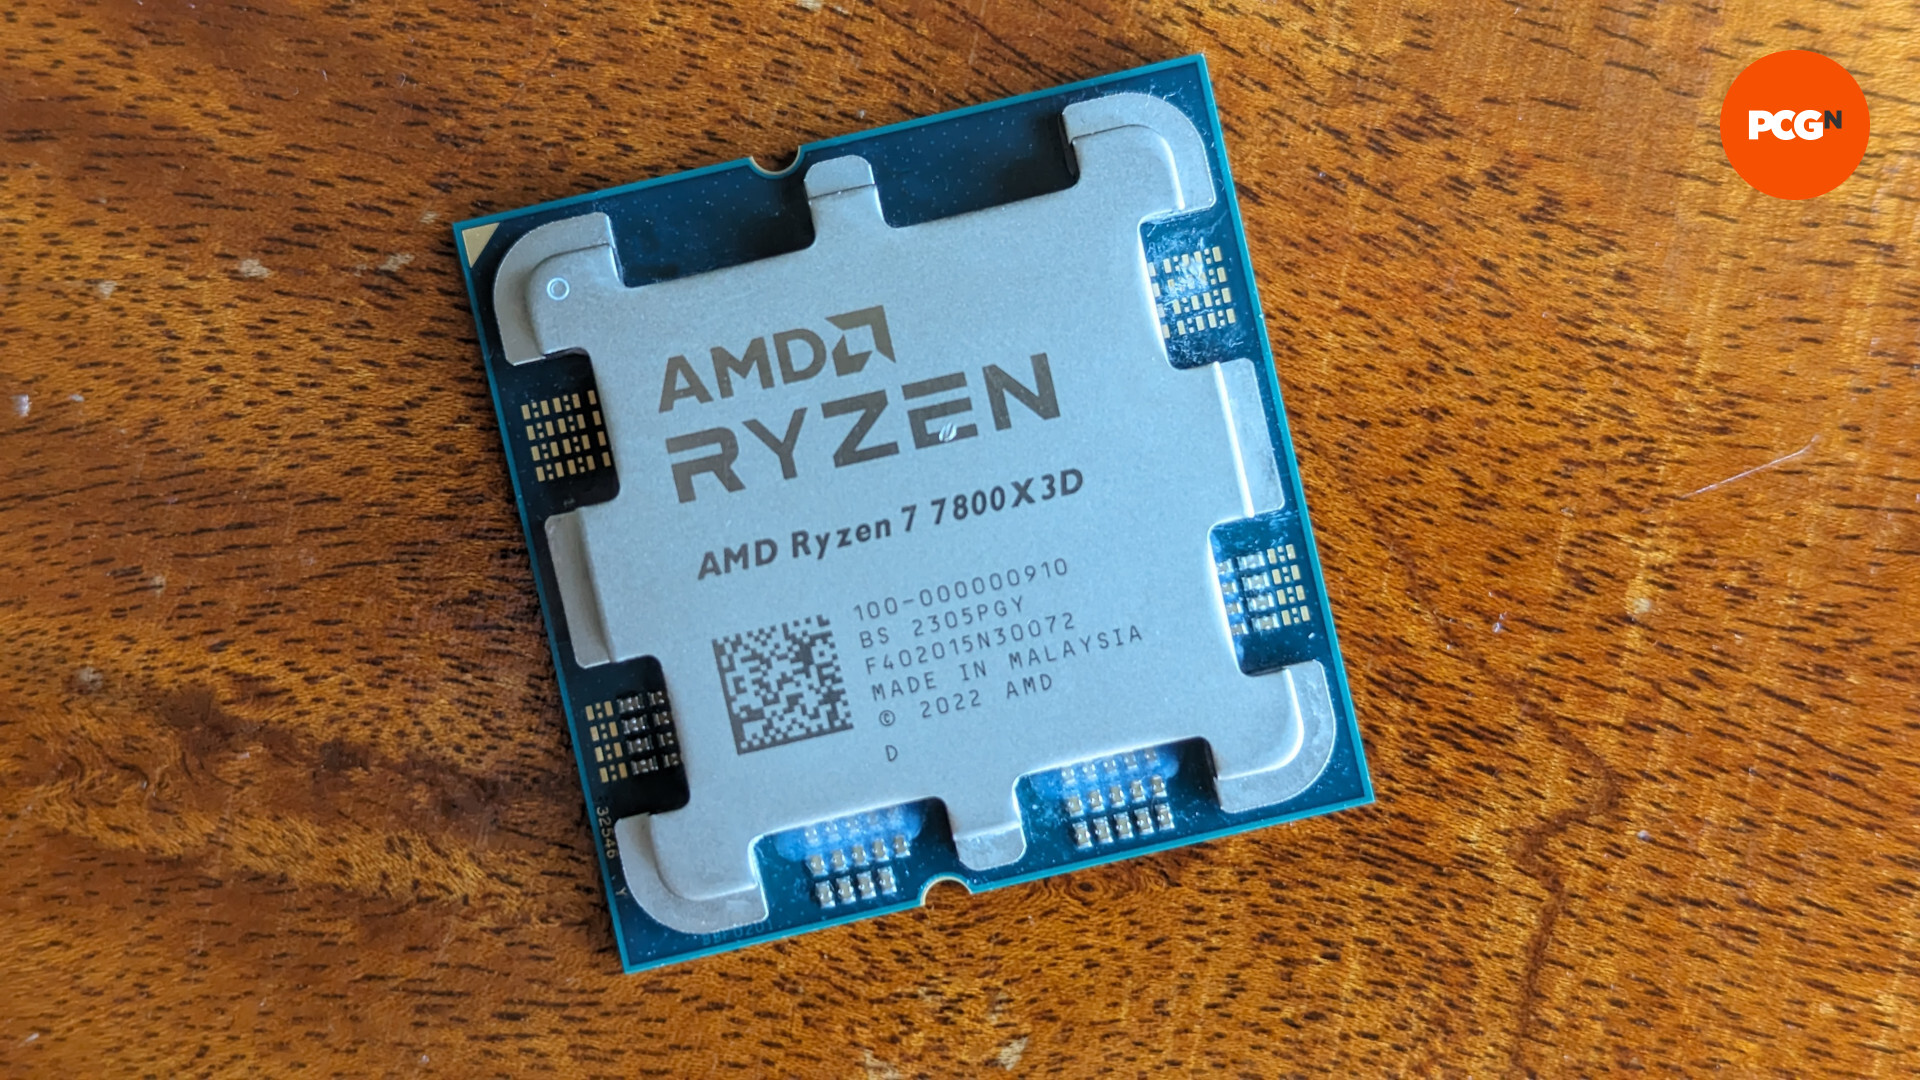 AMD Ryzen 7 7800X3D review: The CPU rests on a wooden surface